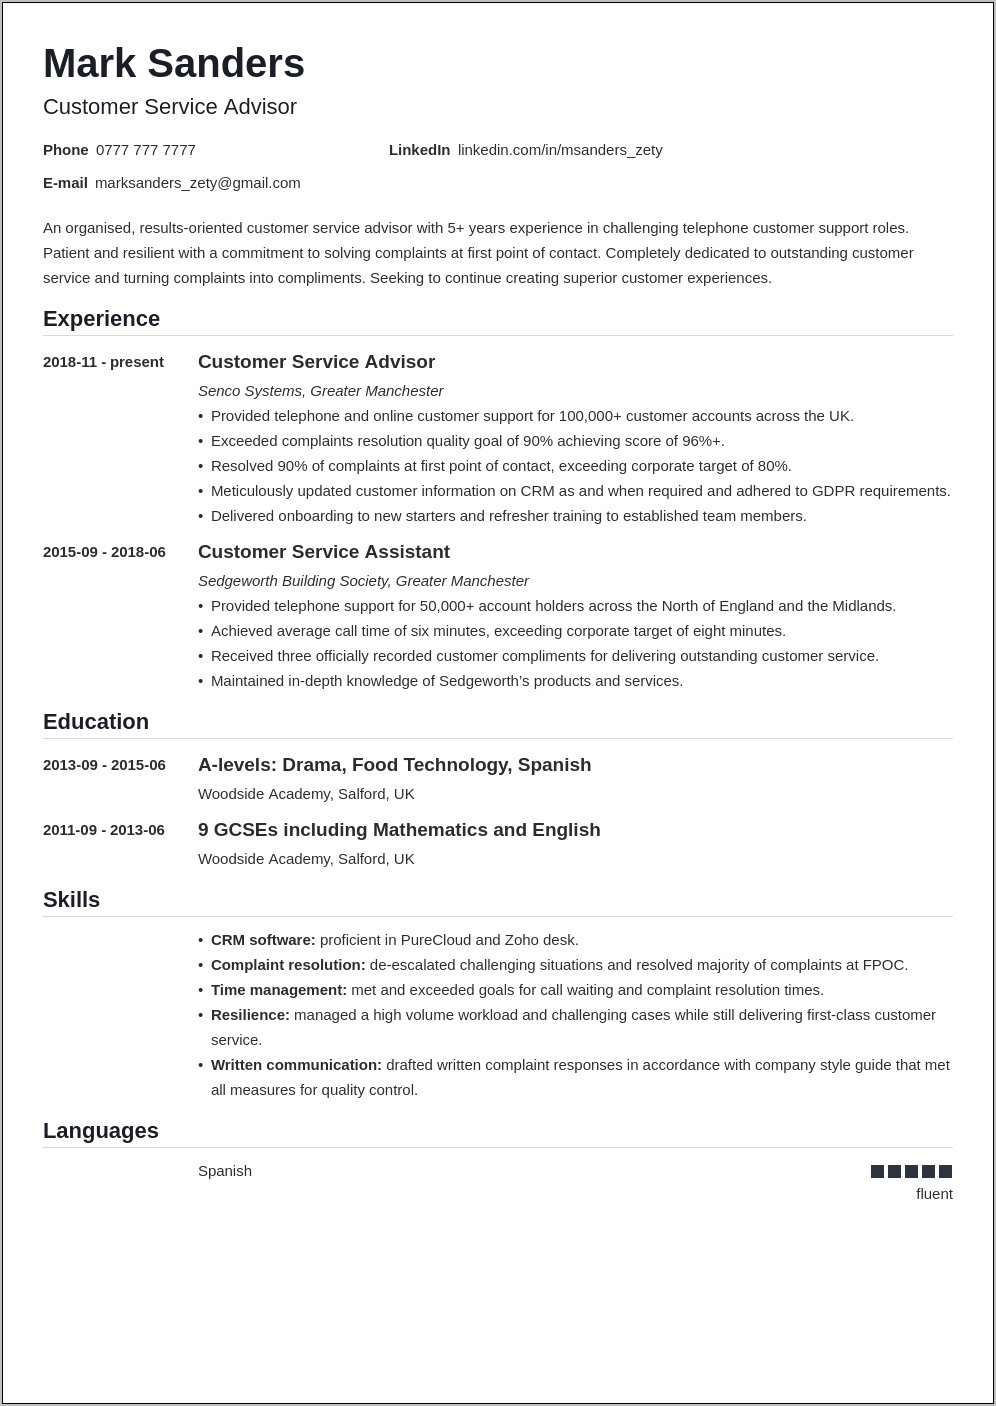 Resume Summary For Hospitality And Client Service